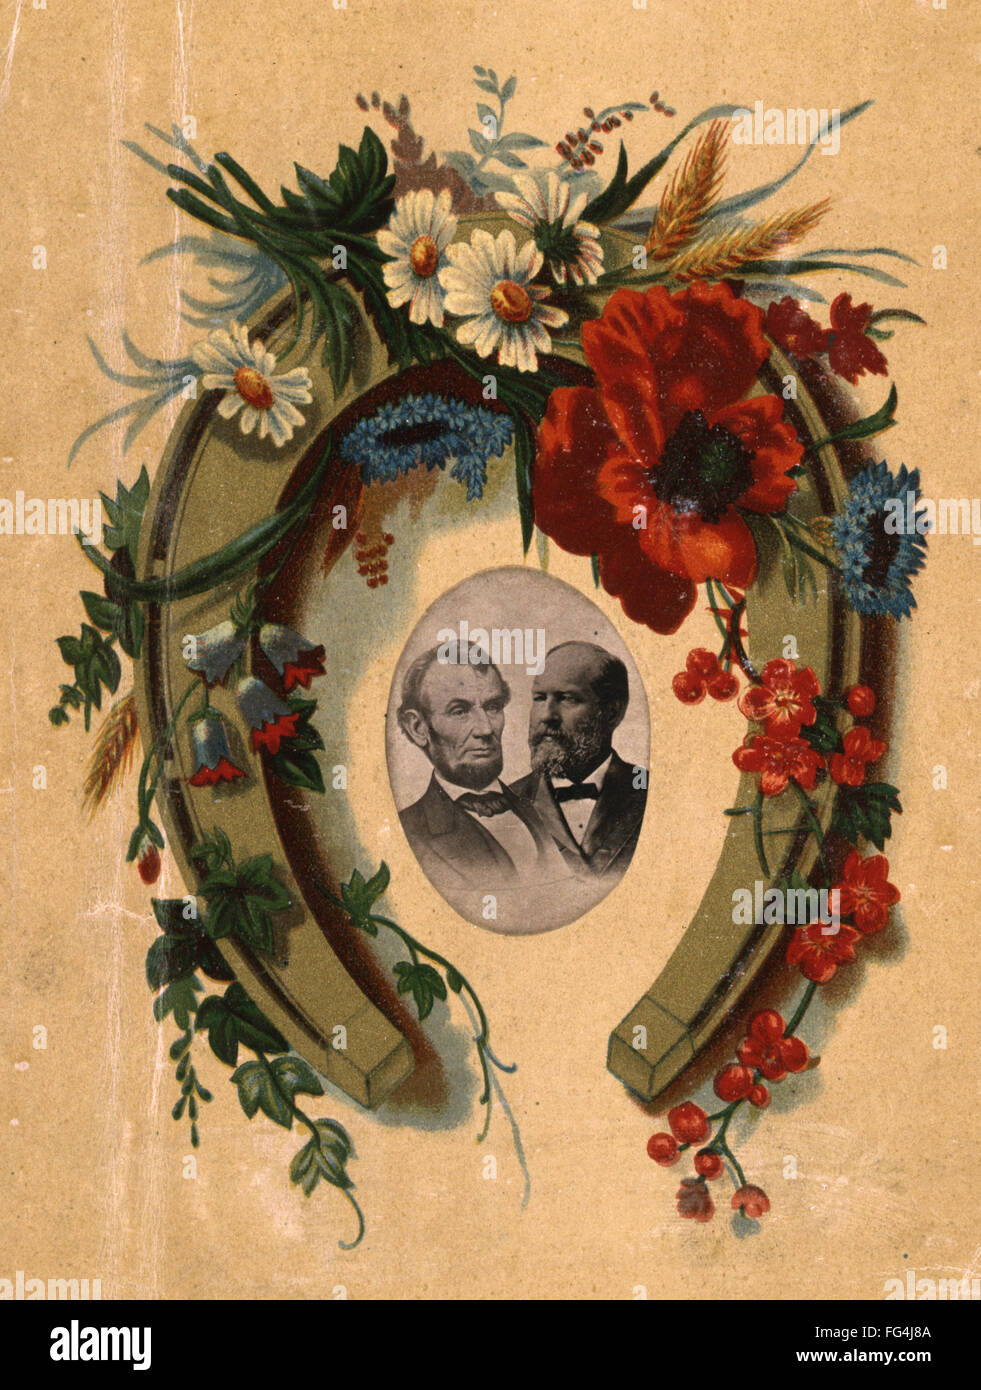 LINCOLN AND GARFIELD. /nMemorial card for assassinated presidents Abraham Lincoln and James Garfield, c1881. Stock Photo